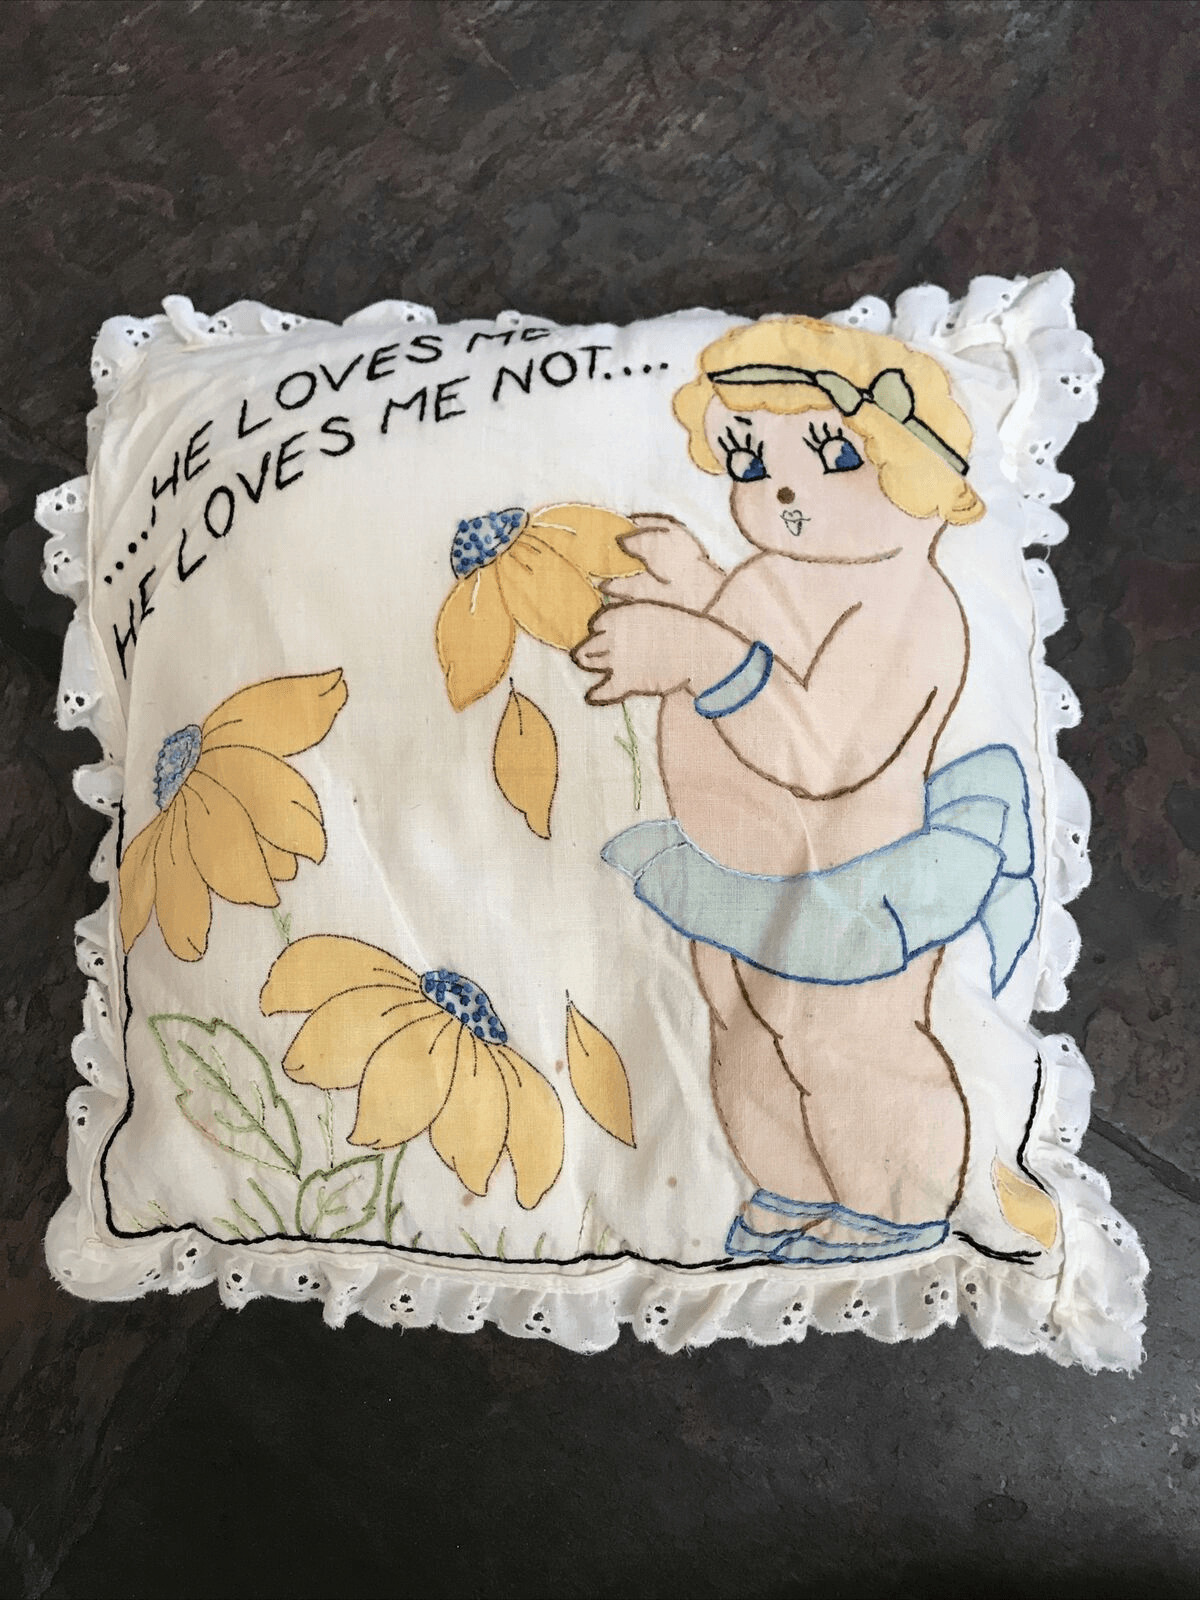 Antique Embroider Pillow He Loves Me He Lives Me Not... Daisy 12 X 12